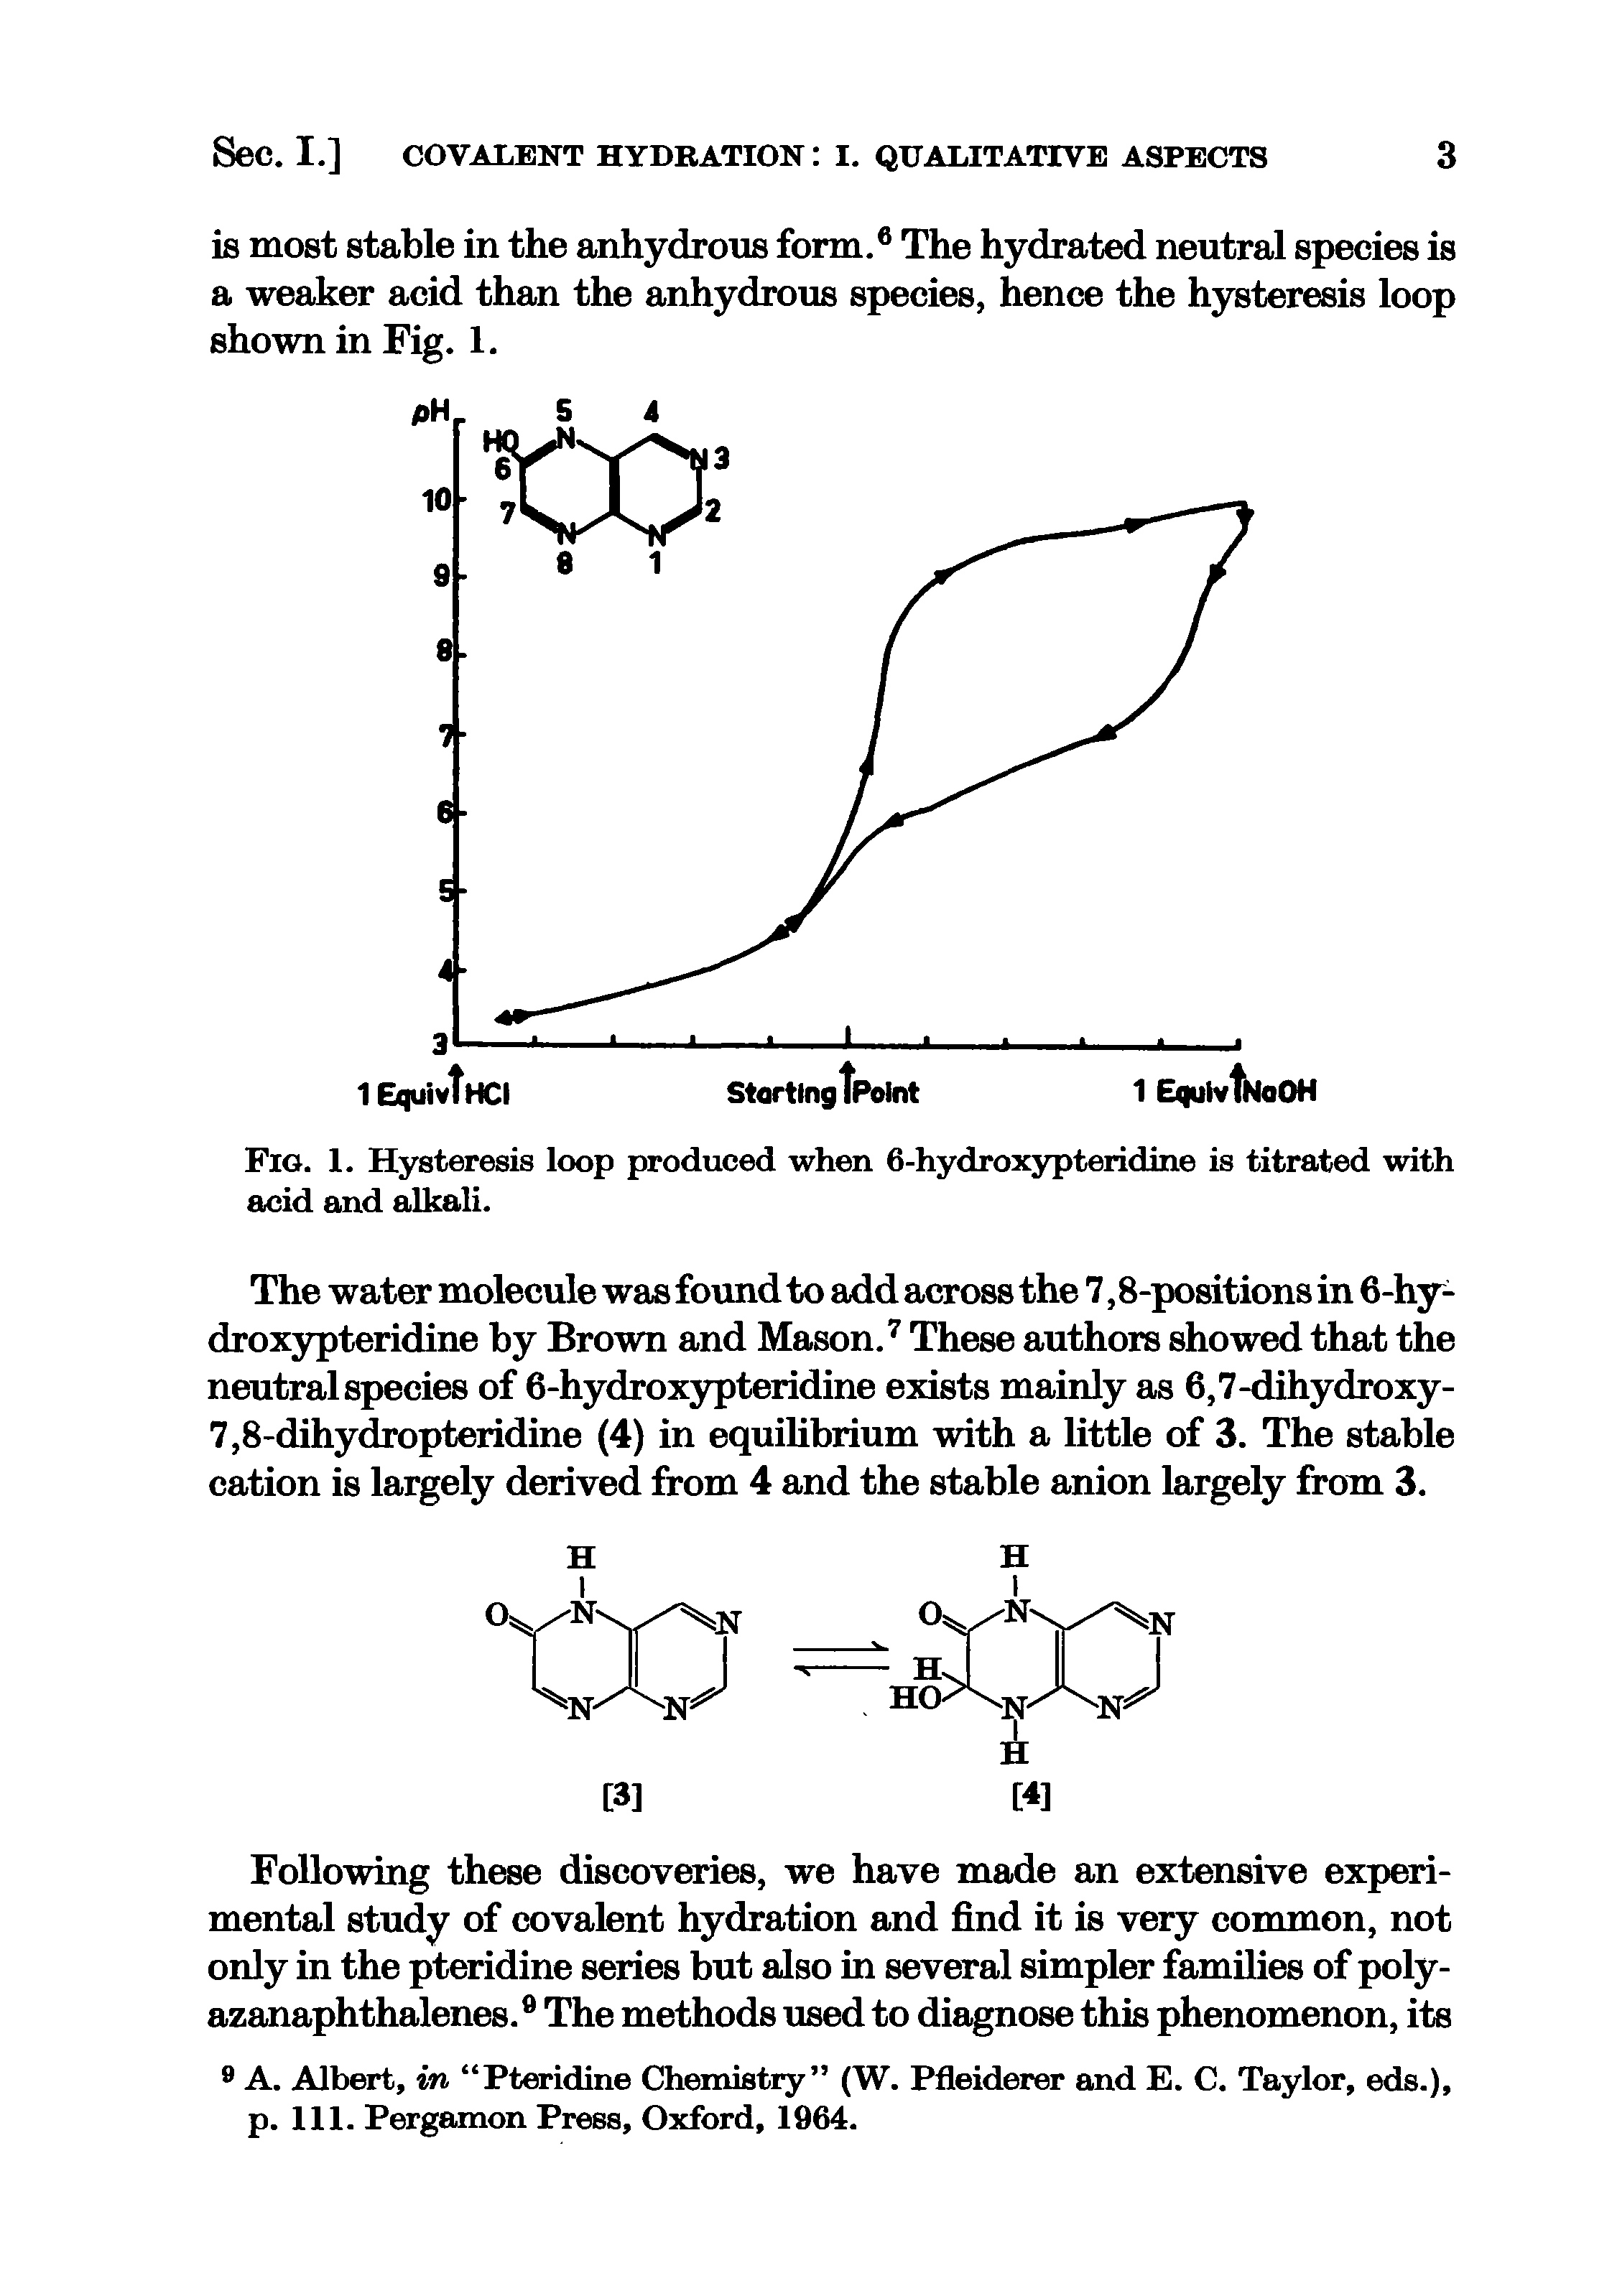 Fig. 1. Hysteresis loop produced when 6-hydroxypteridine is titrated with acid and alkali.